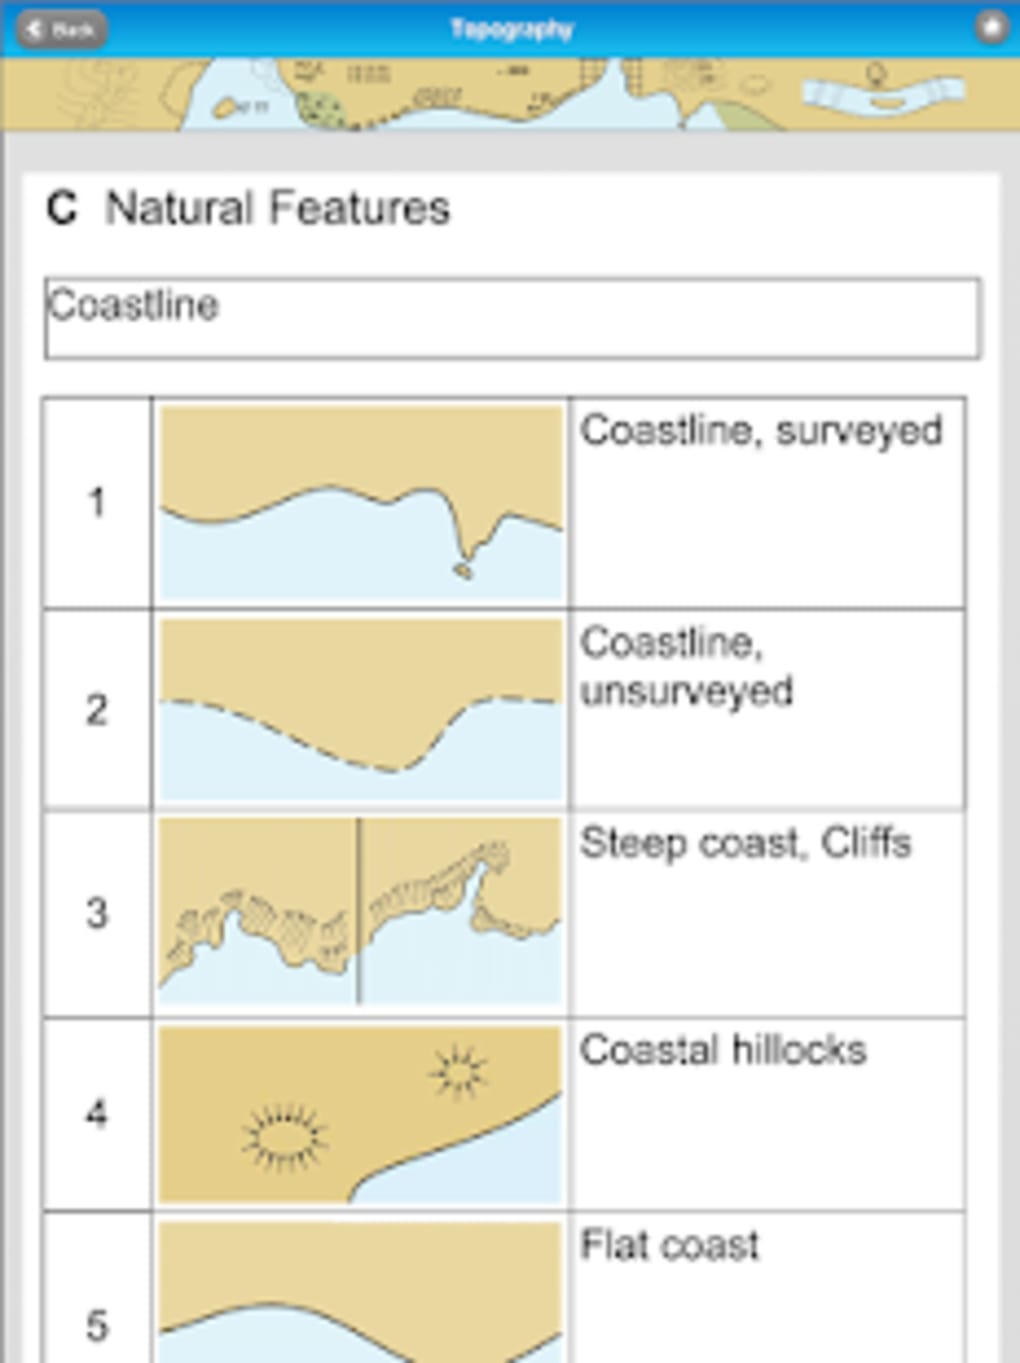 Nautical Chart Symbols And Meanings